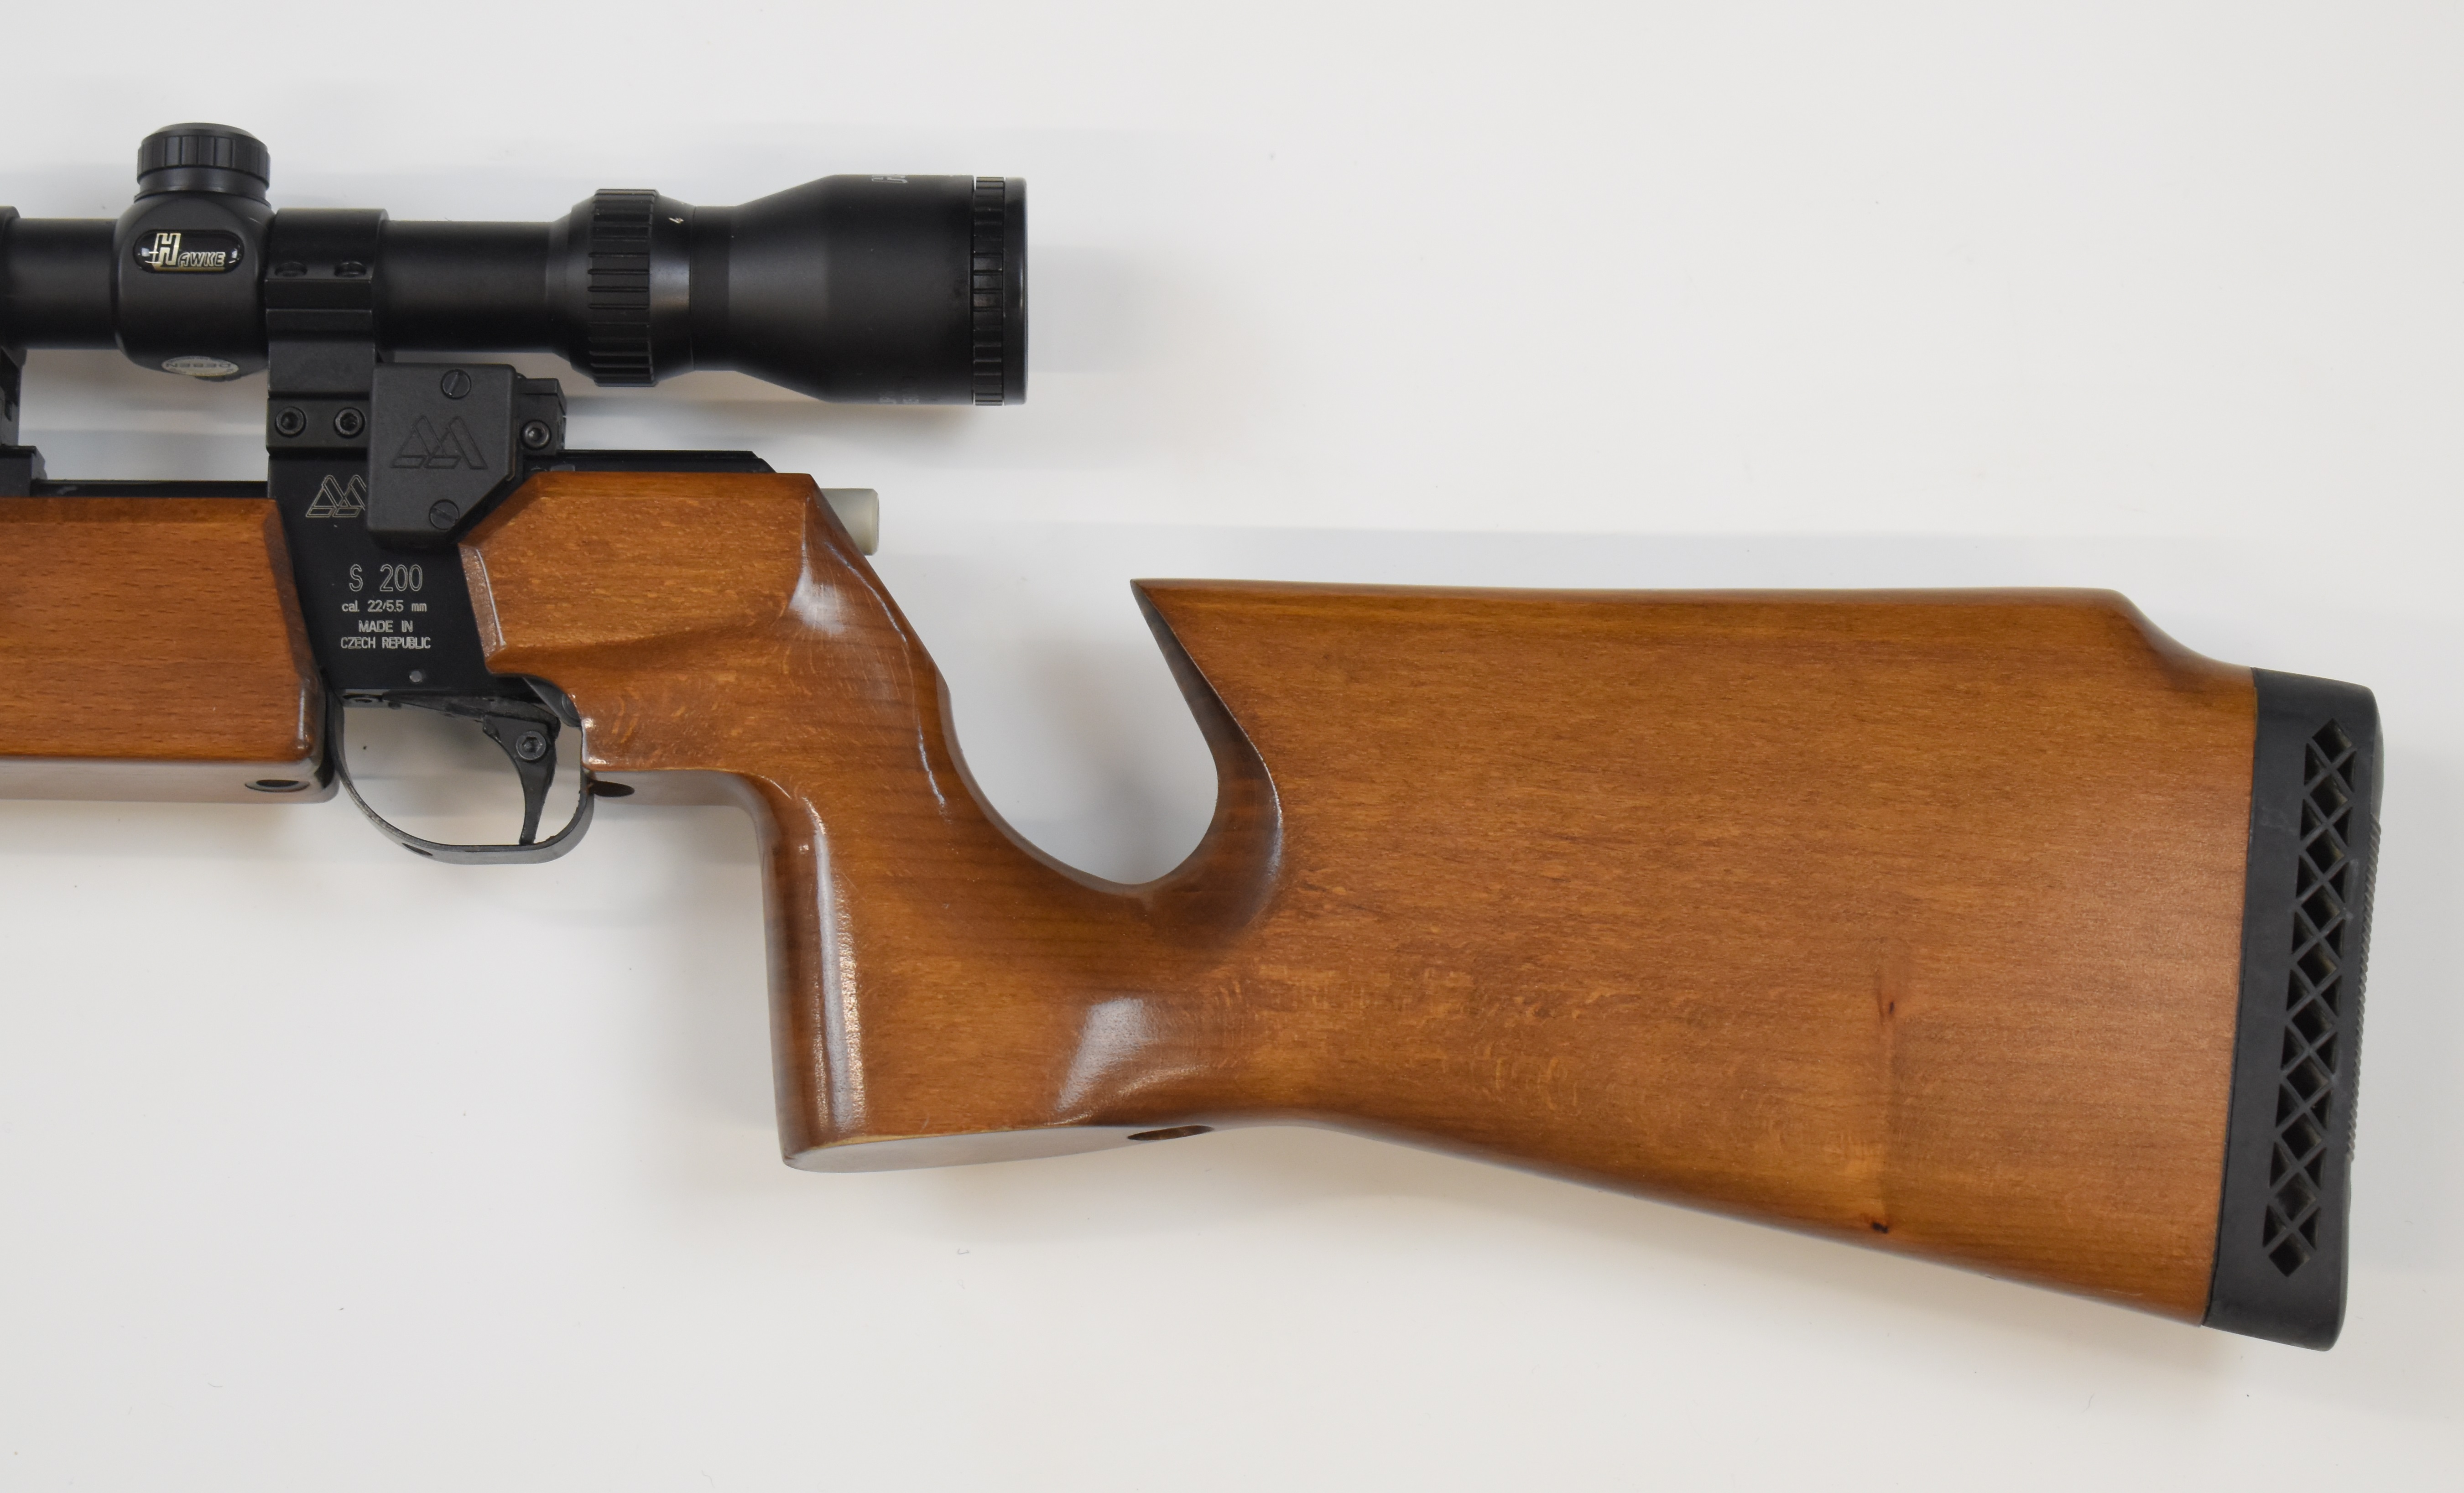 Air Arms S200 .22 PCP air rifle with 10-shot magazine, sound moderator, bi-pod, adjustable trigger - Image 7 of 9